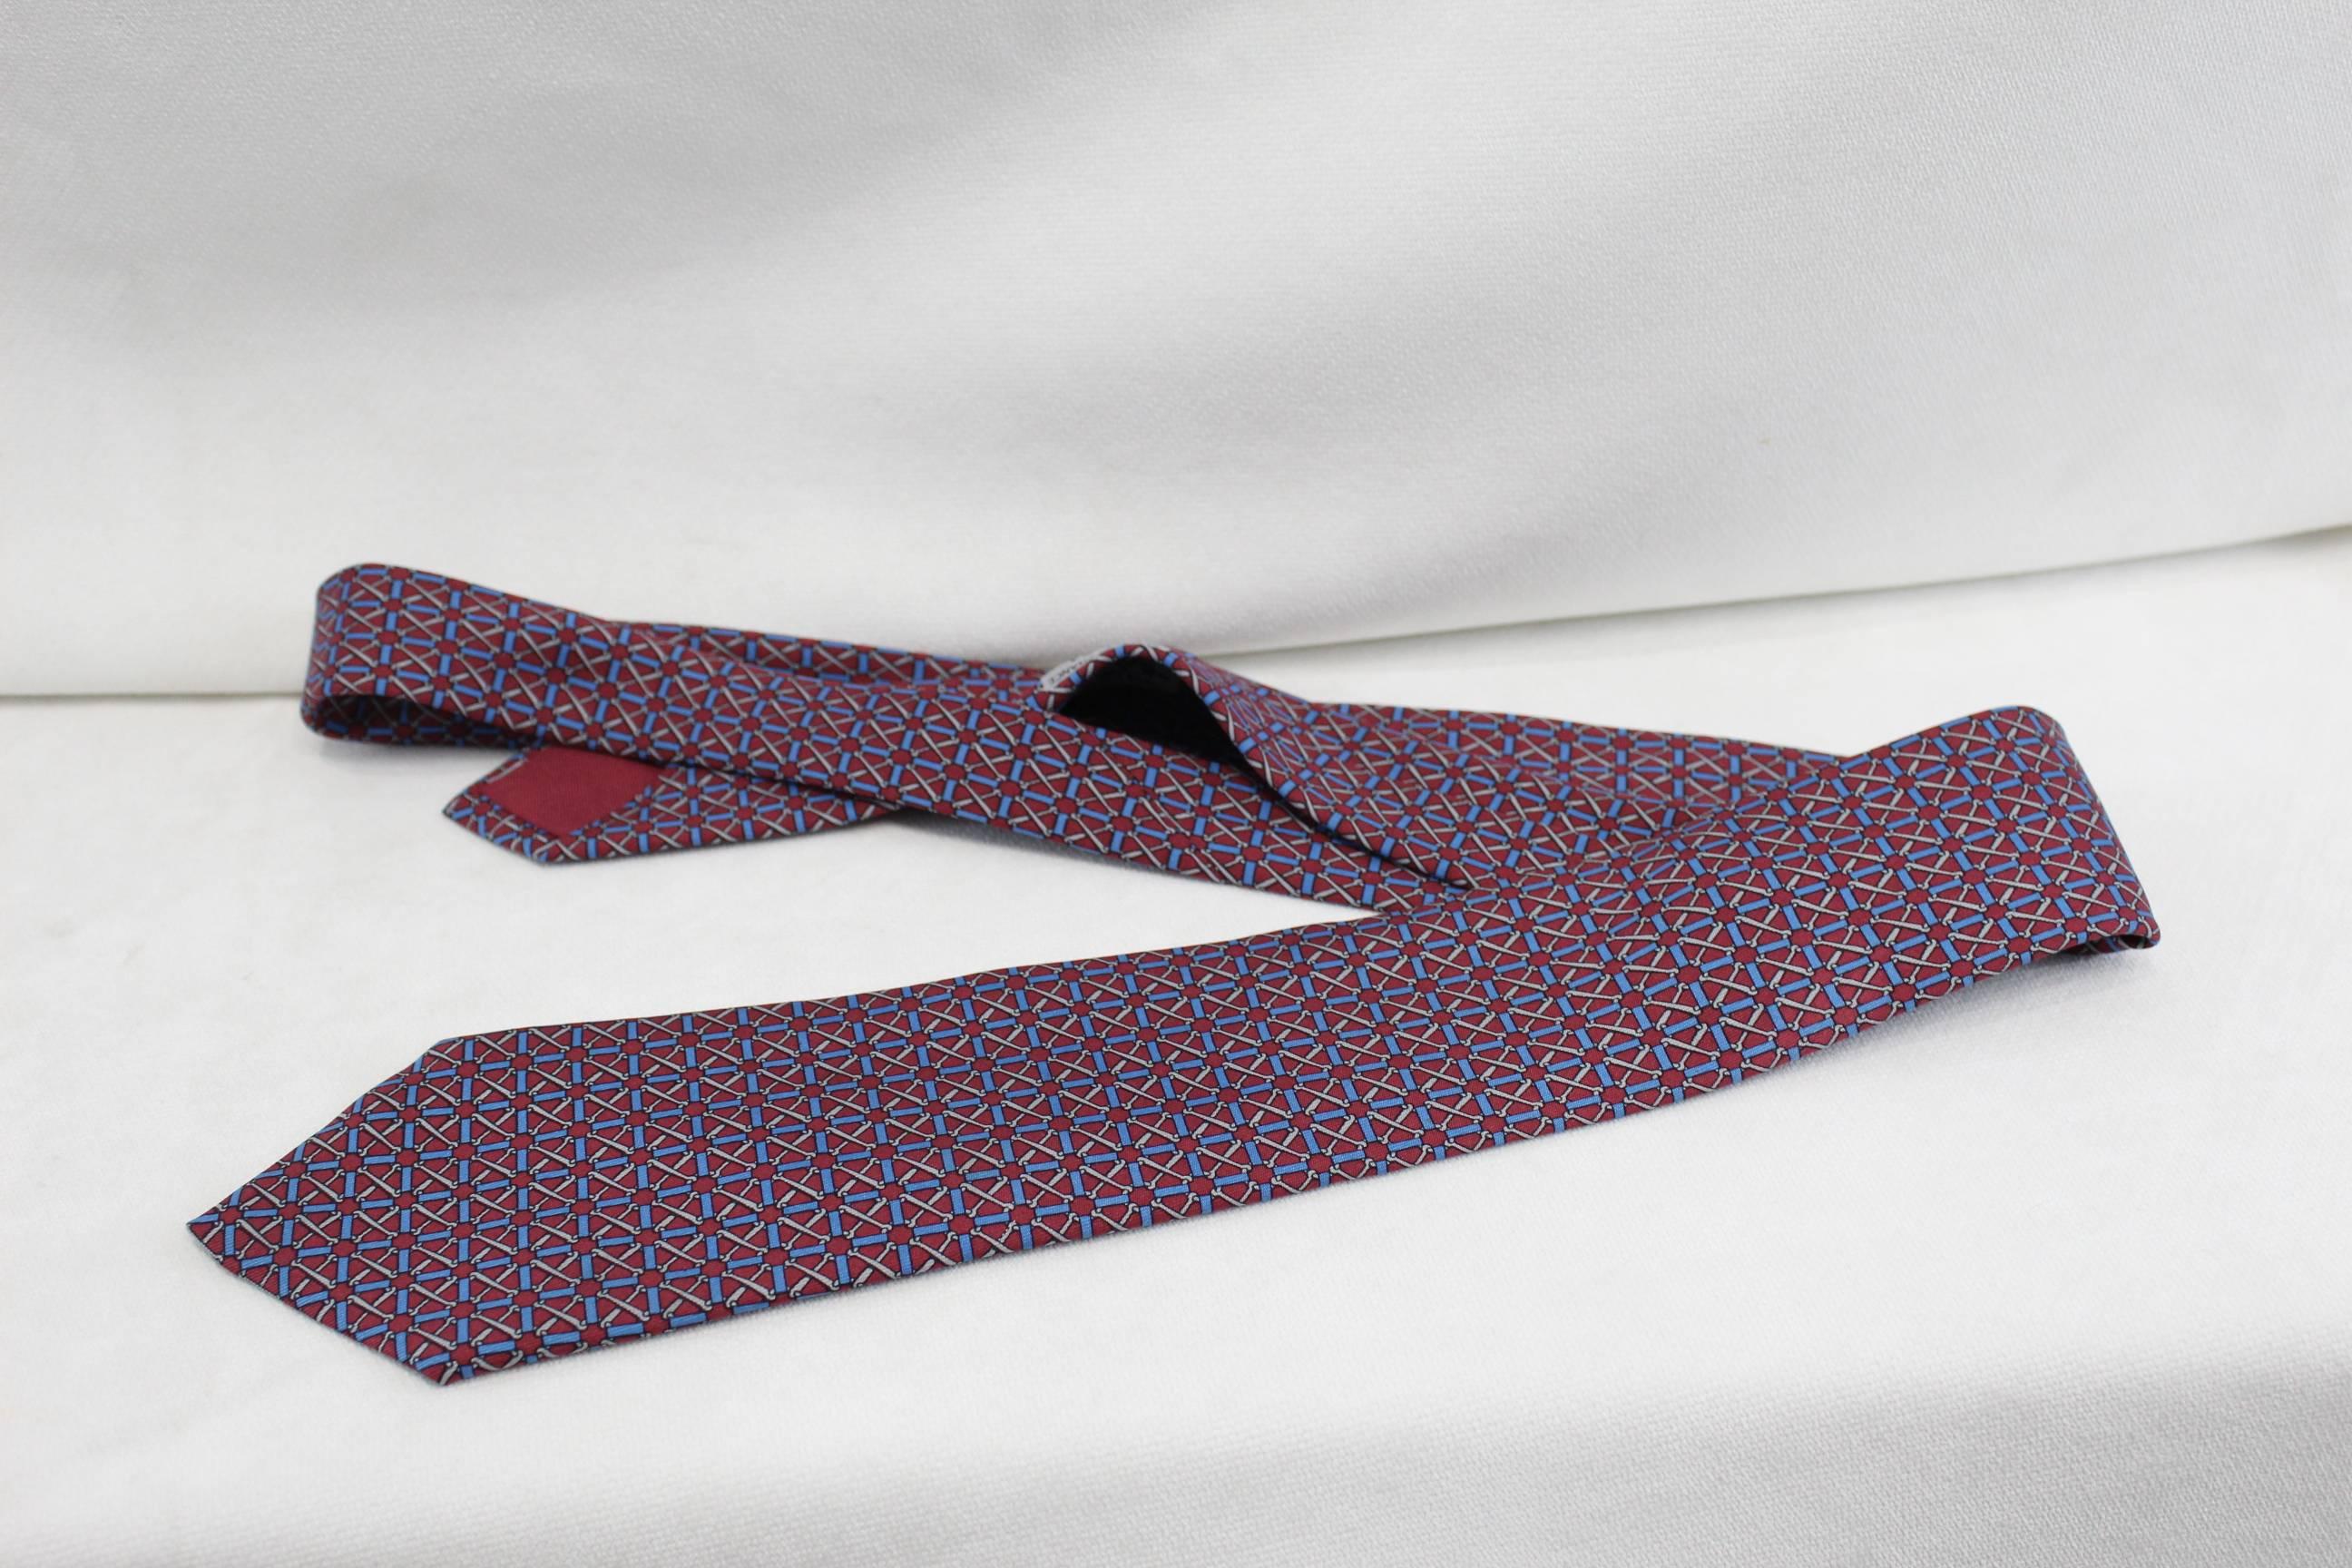 Really nice vintage Hermes tie.
Good condition.